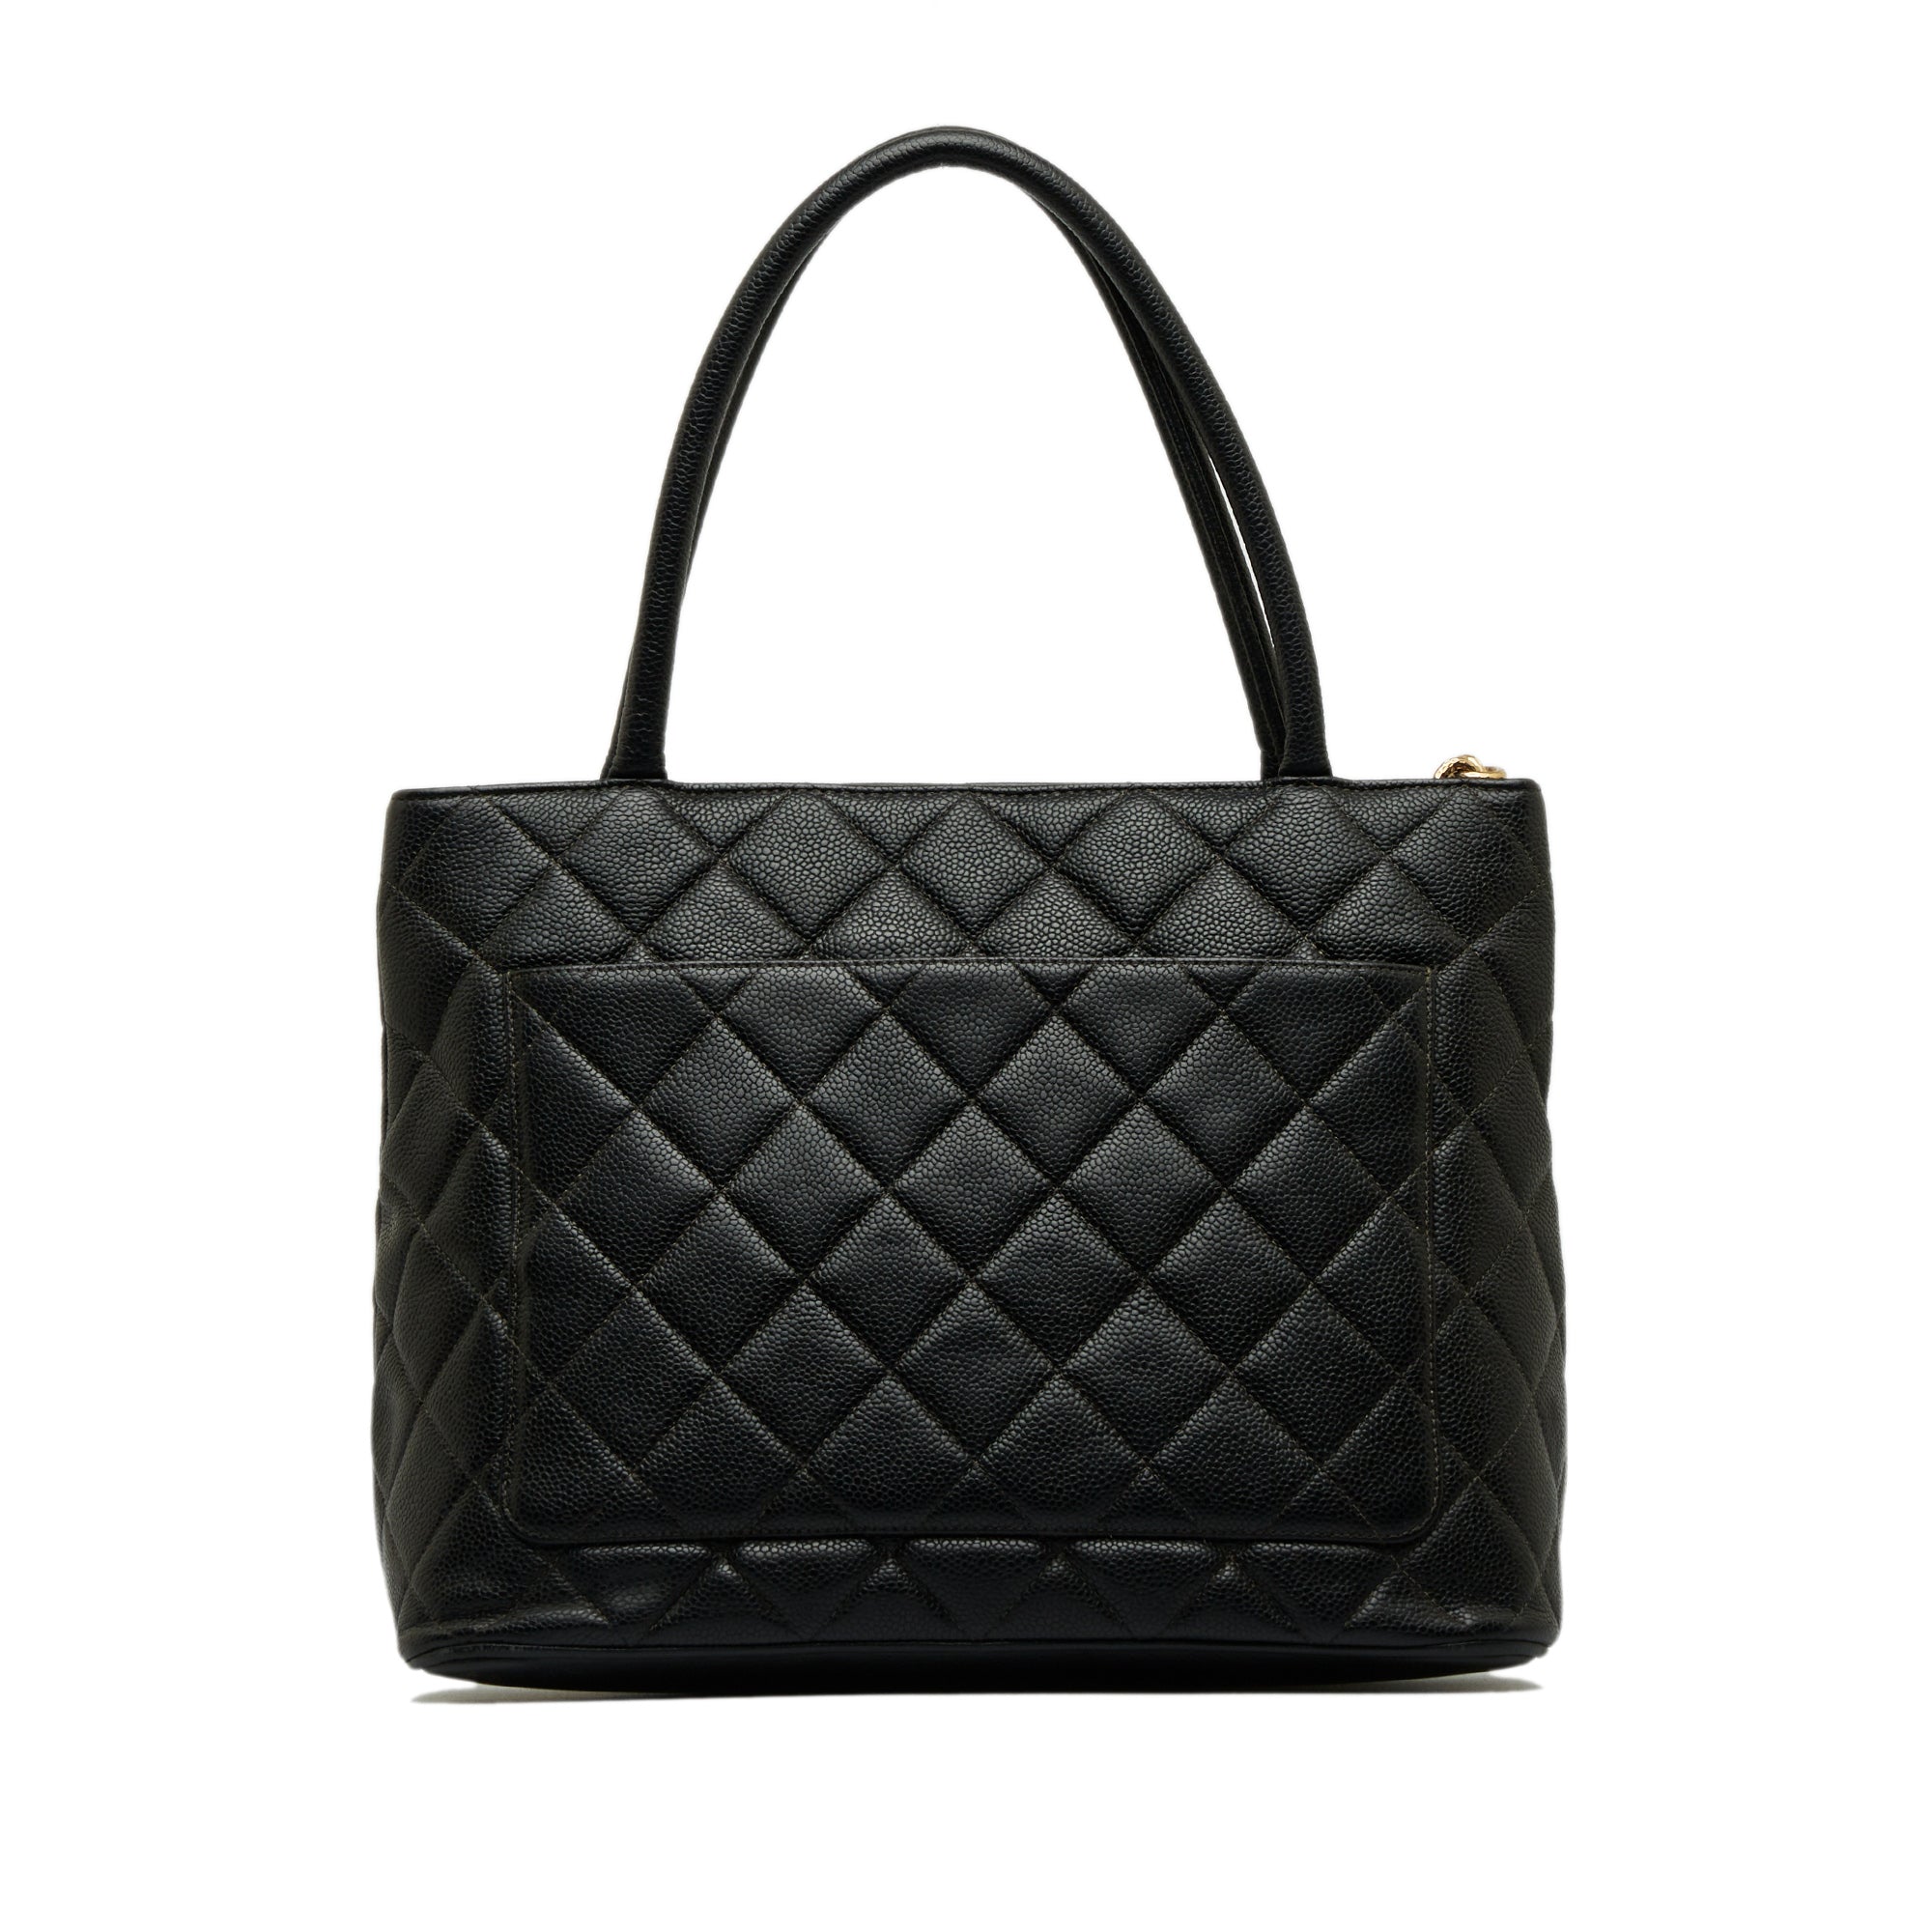 Chanel Black Quilted Caviar Leather Medallion Tote (Authentic Pre-Owned)  Women's